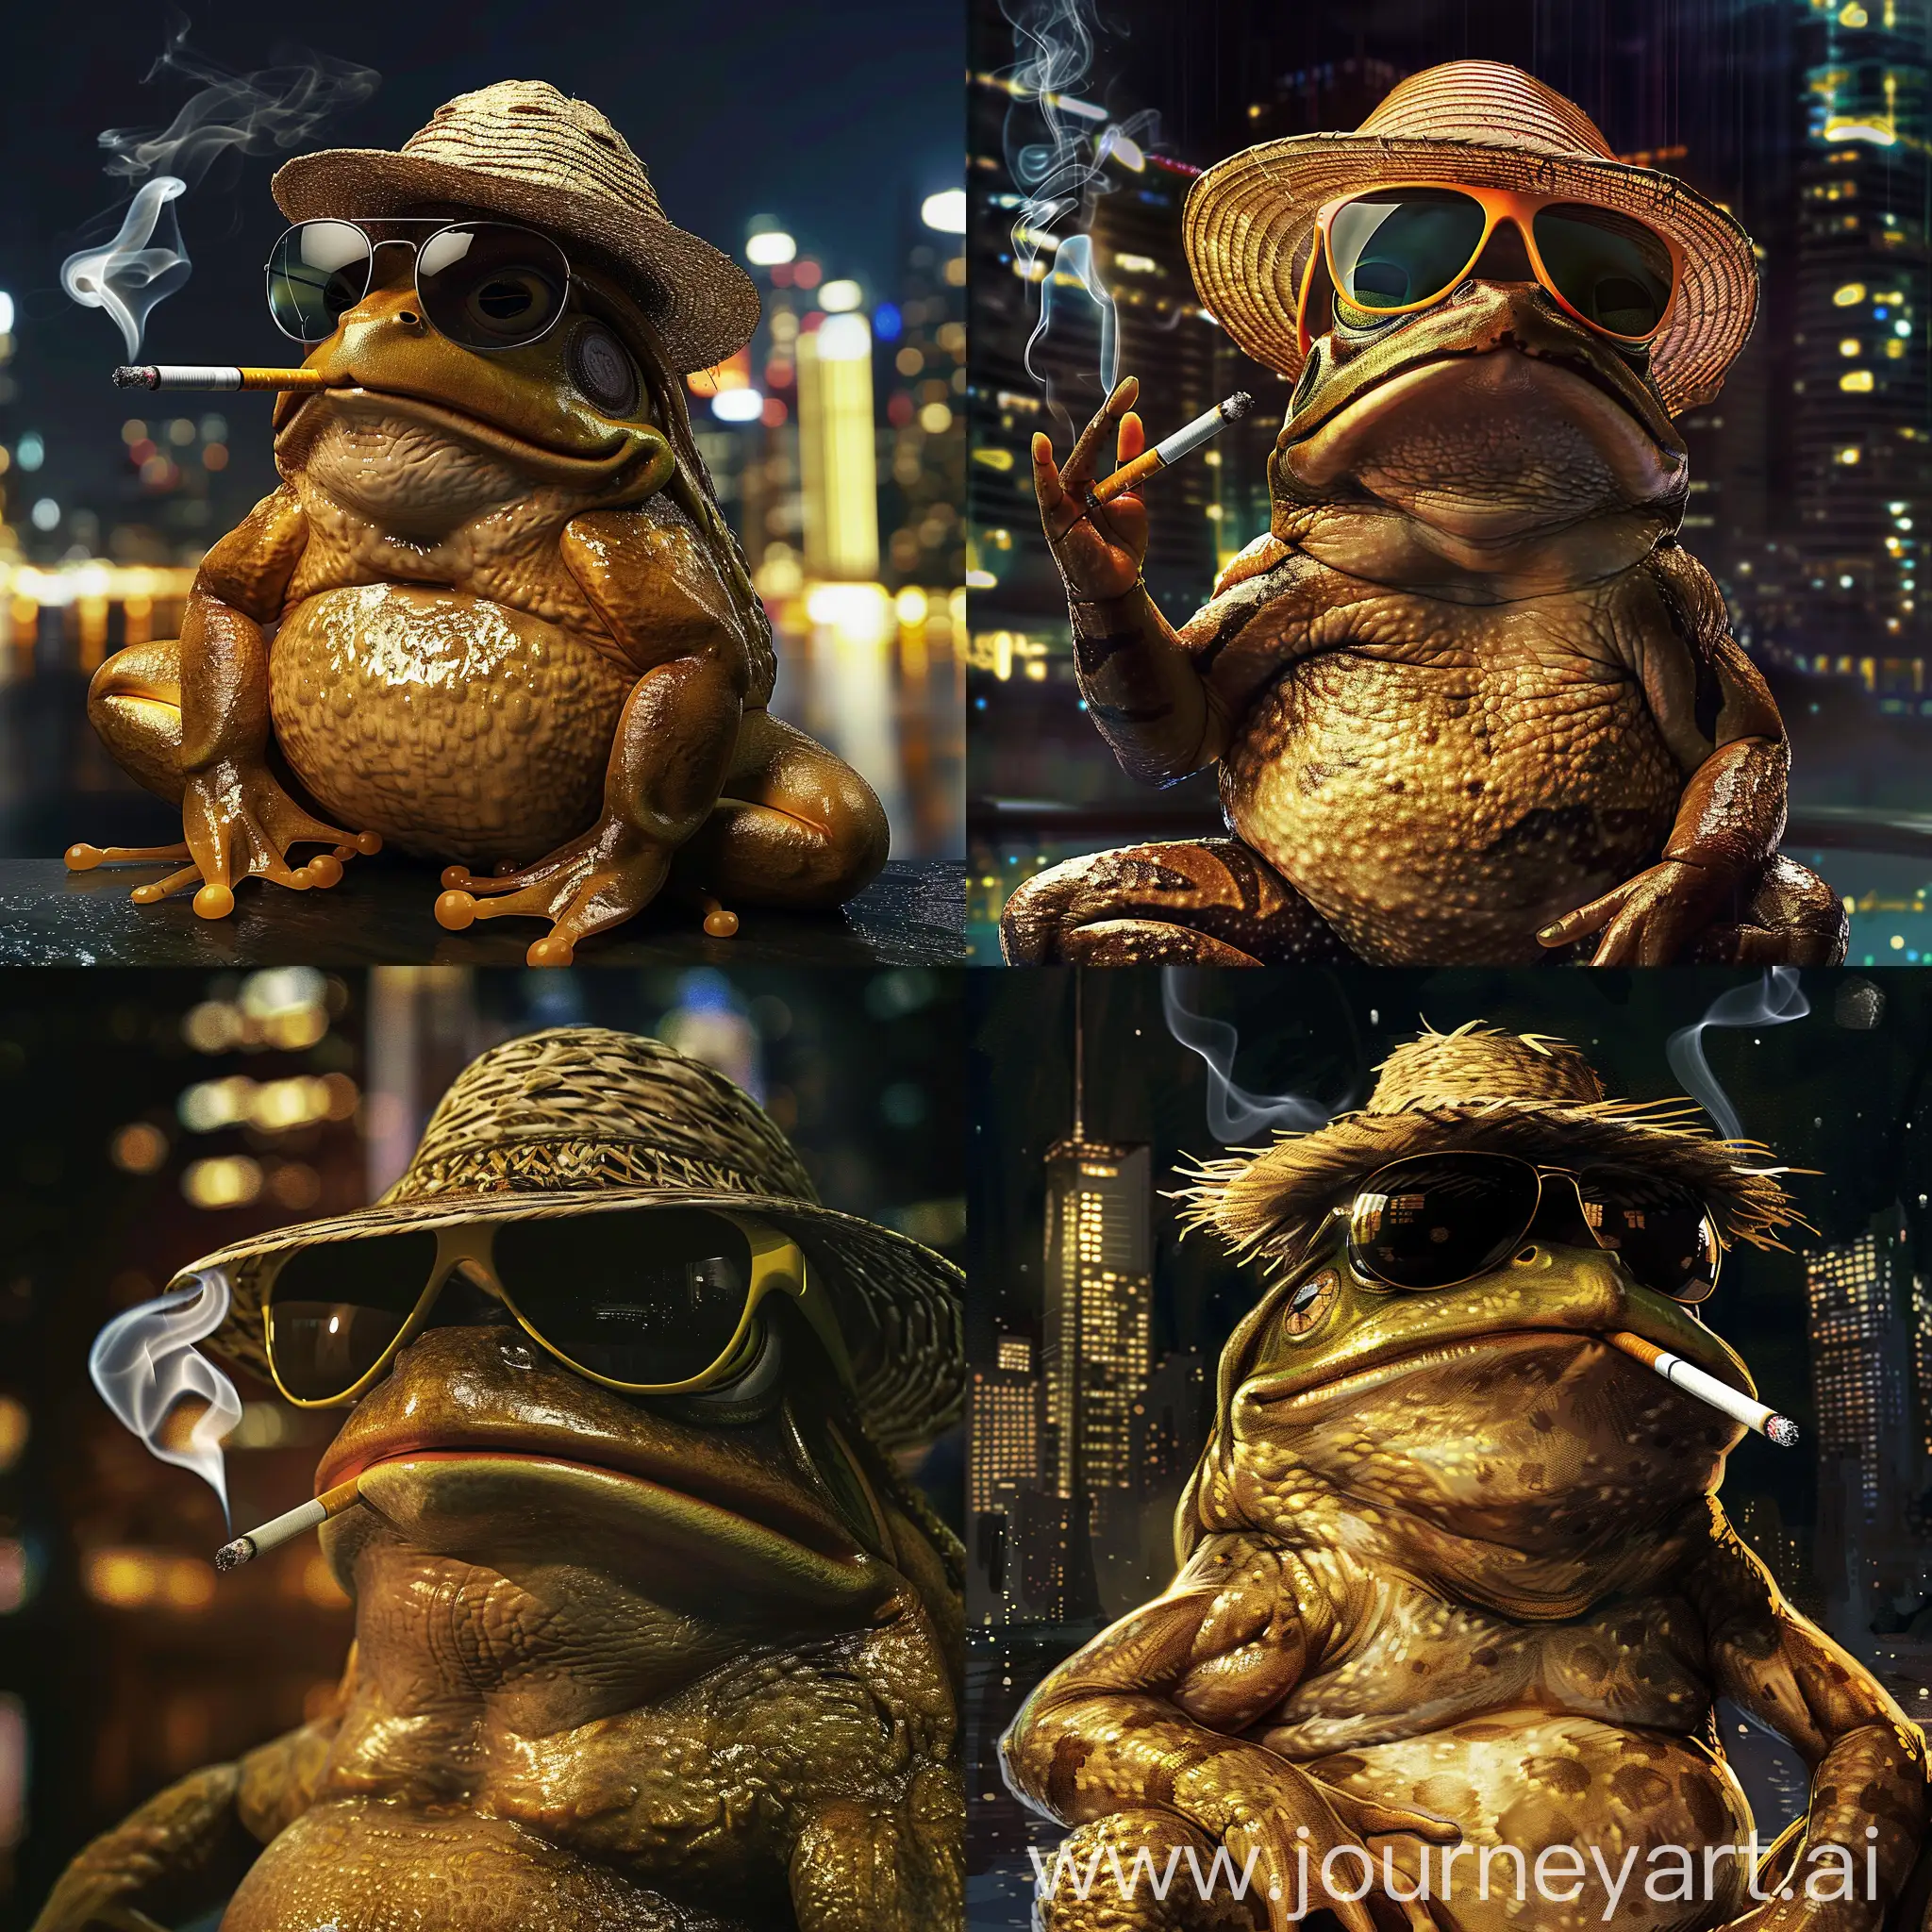 frog, fast, cigarette in mouth, straw hat on head, brown-yellow, in sunglasses, sitting against the backdrop of the night city --v 6 --ar 1:1 --no 16499